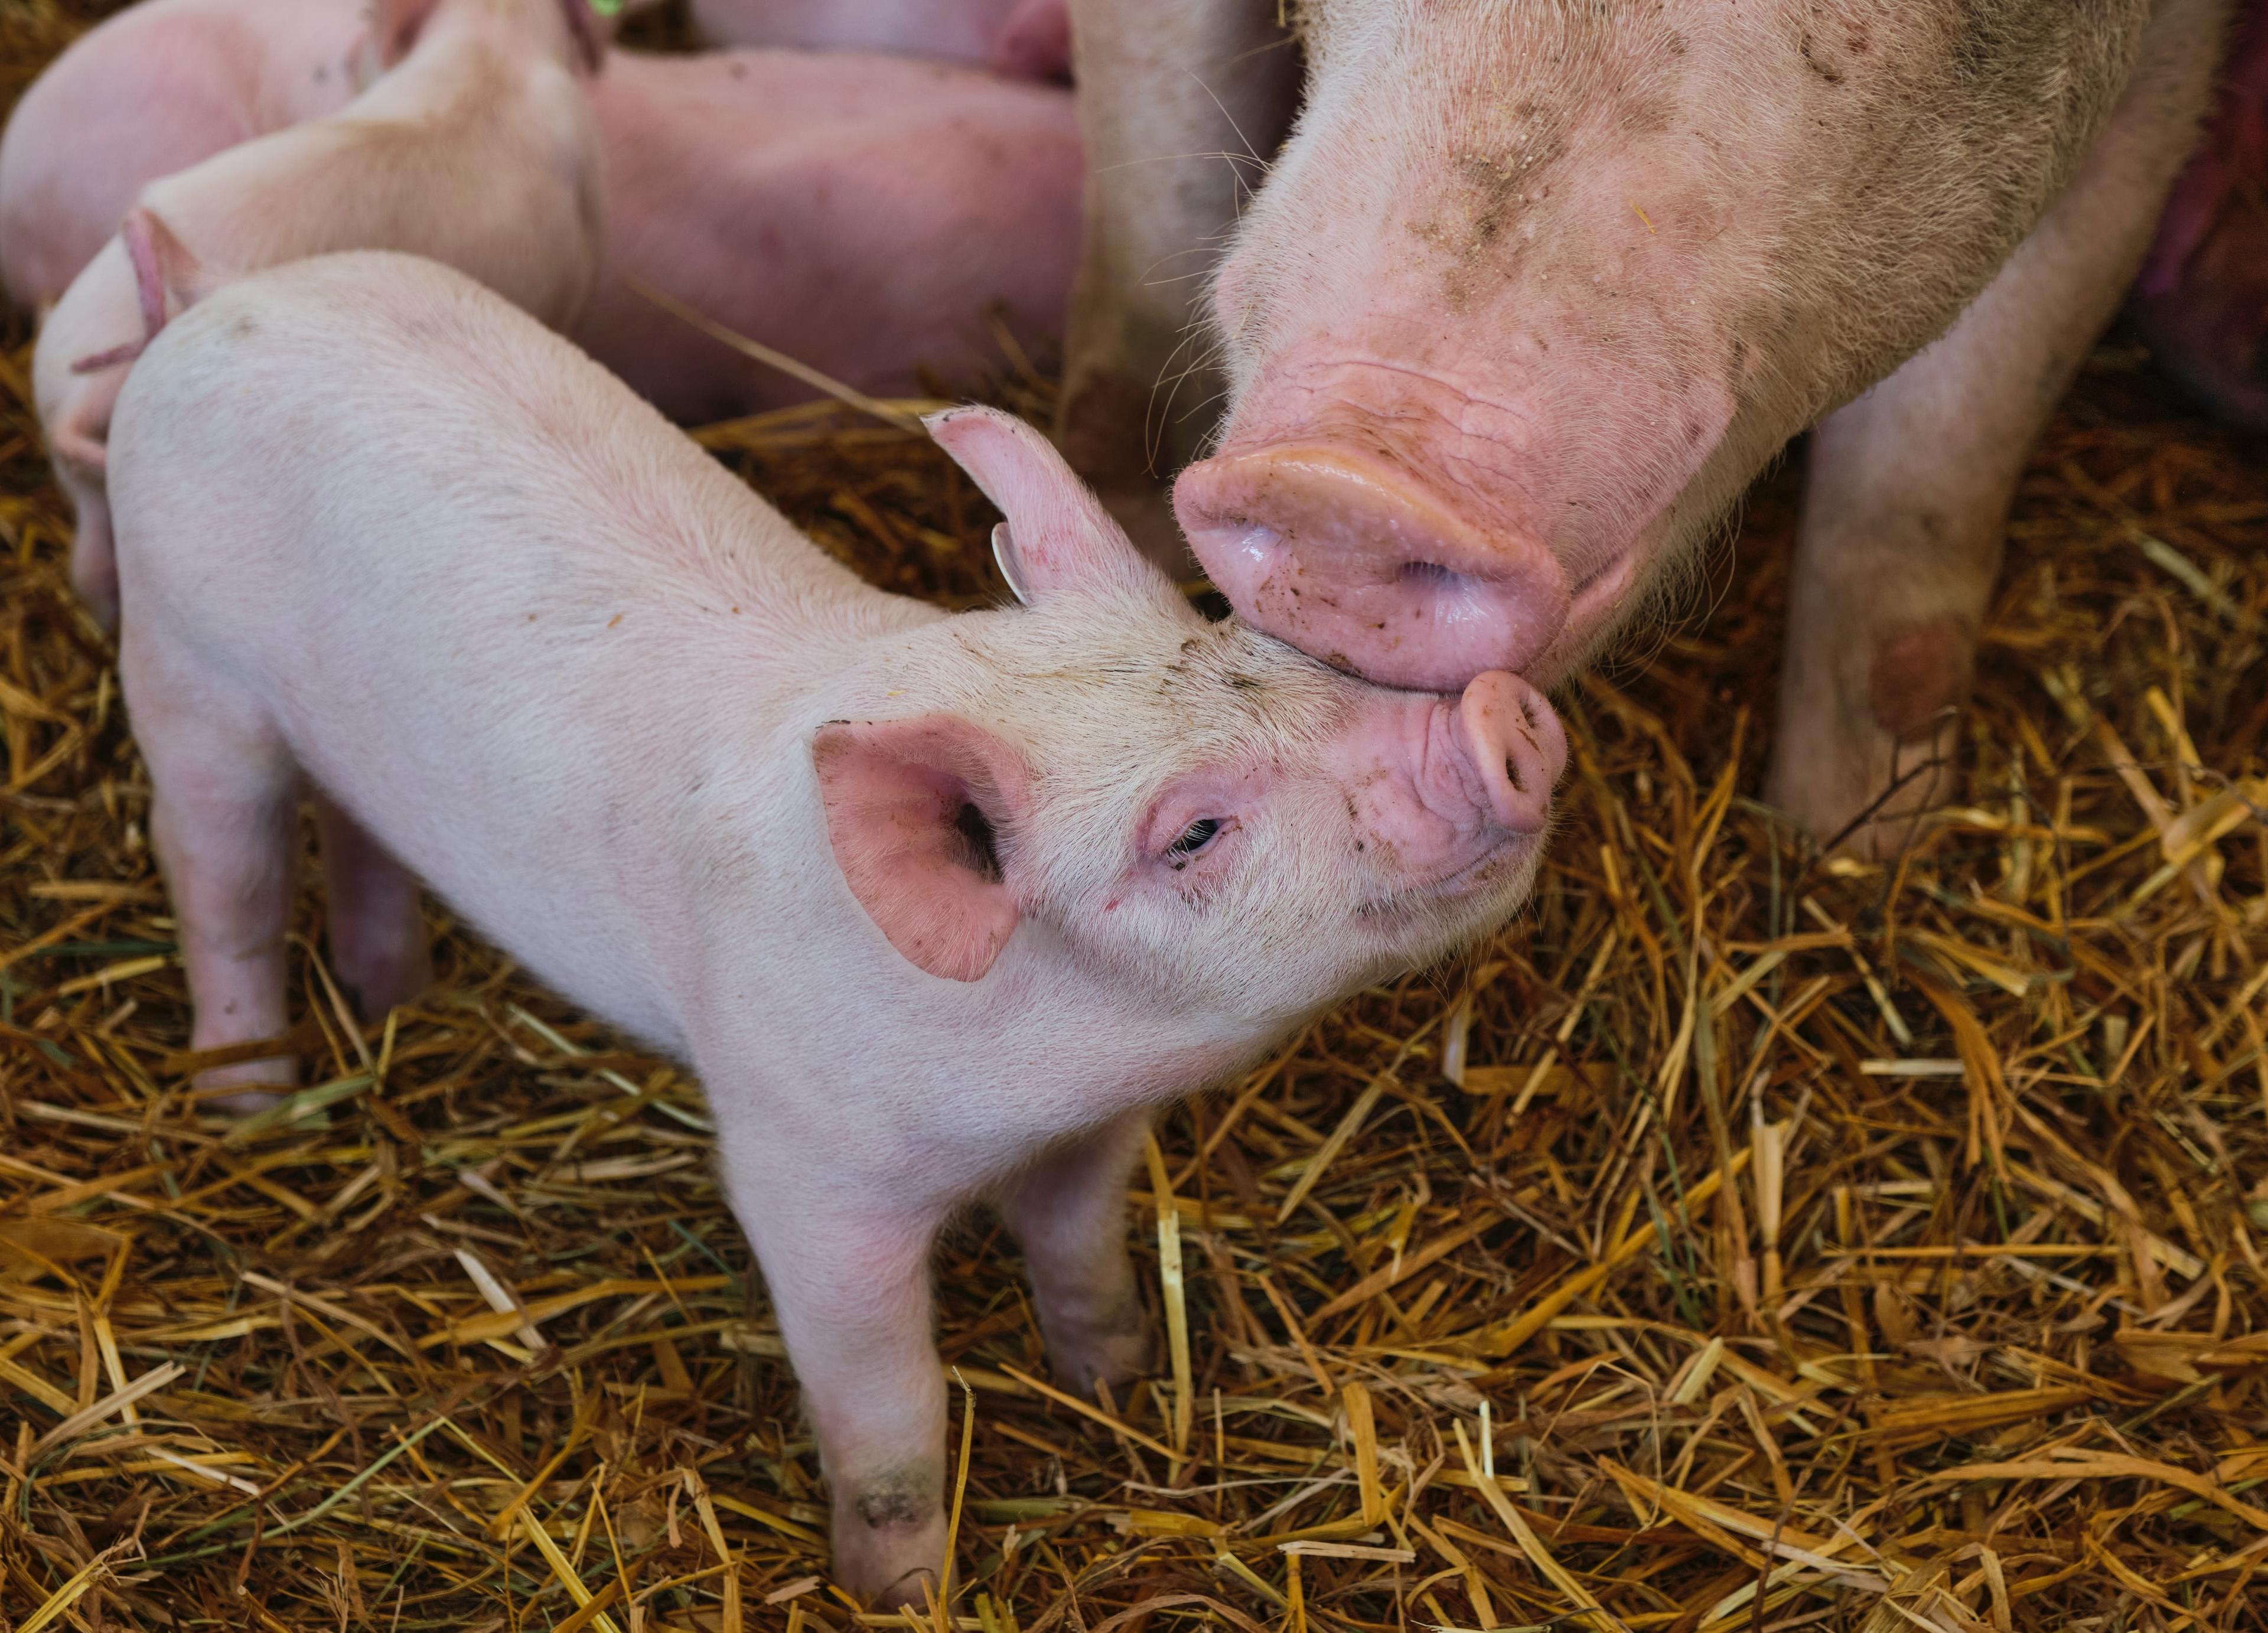 A piglet smooching up to its mother. Other piglets are in the background. They are in an area with hay on the ground.